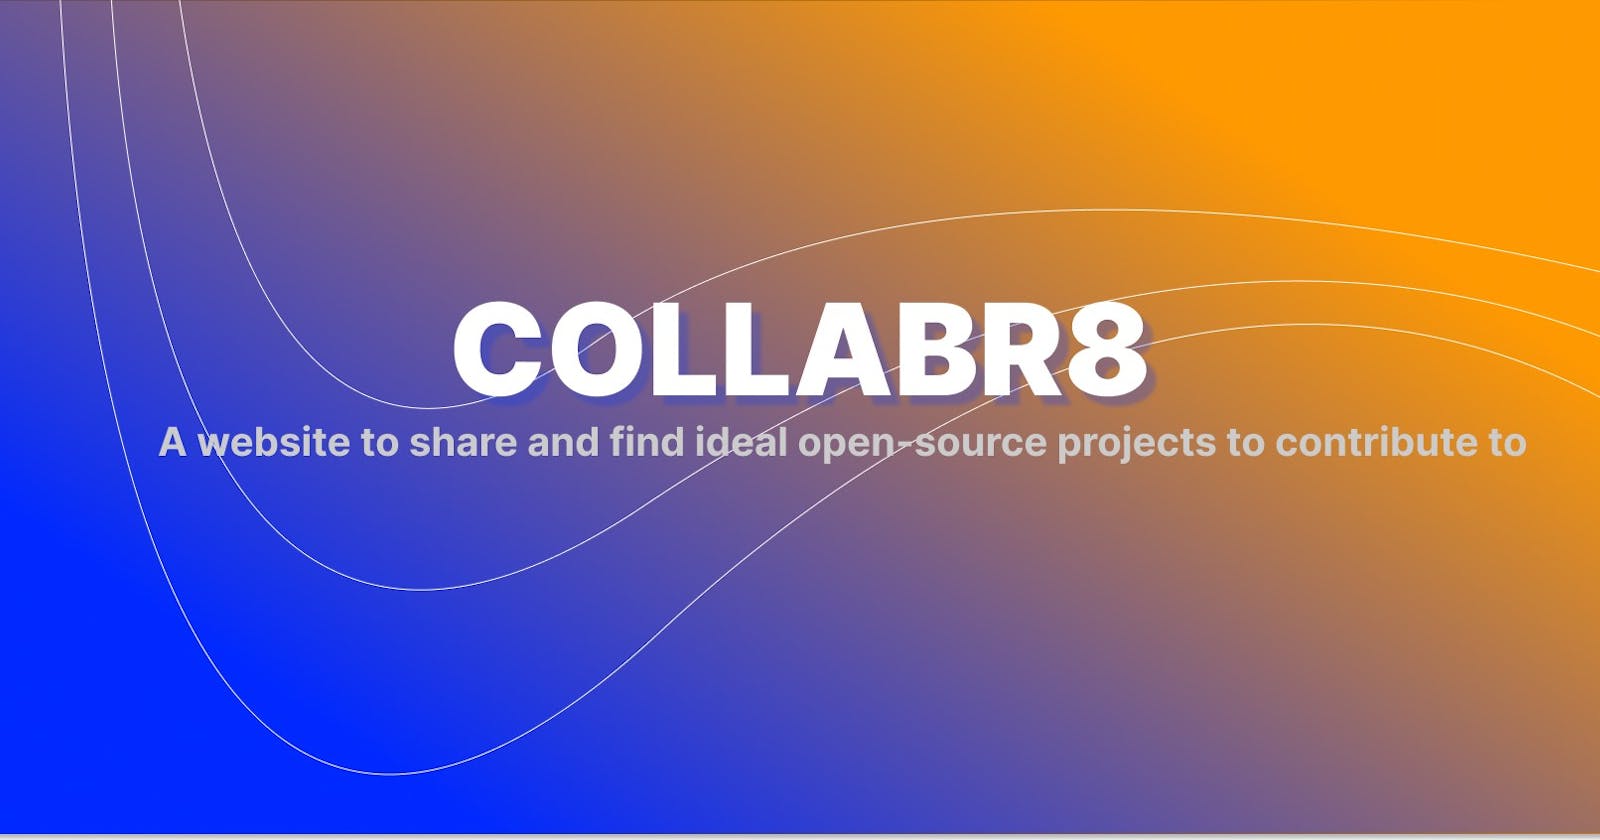 CollabR8, It's Great !